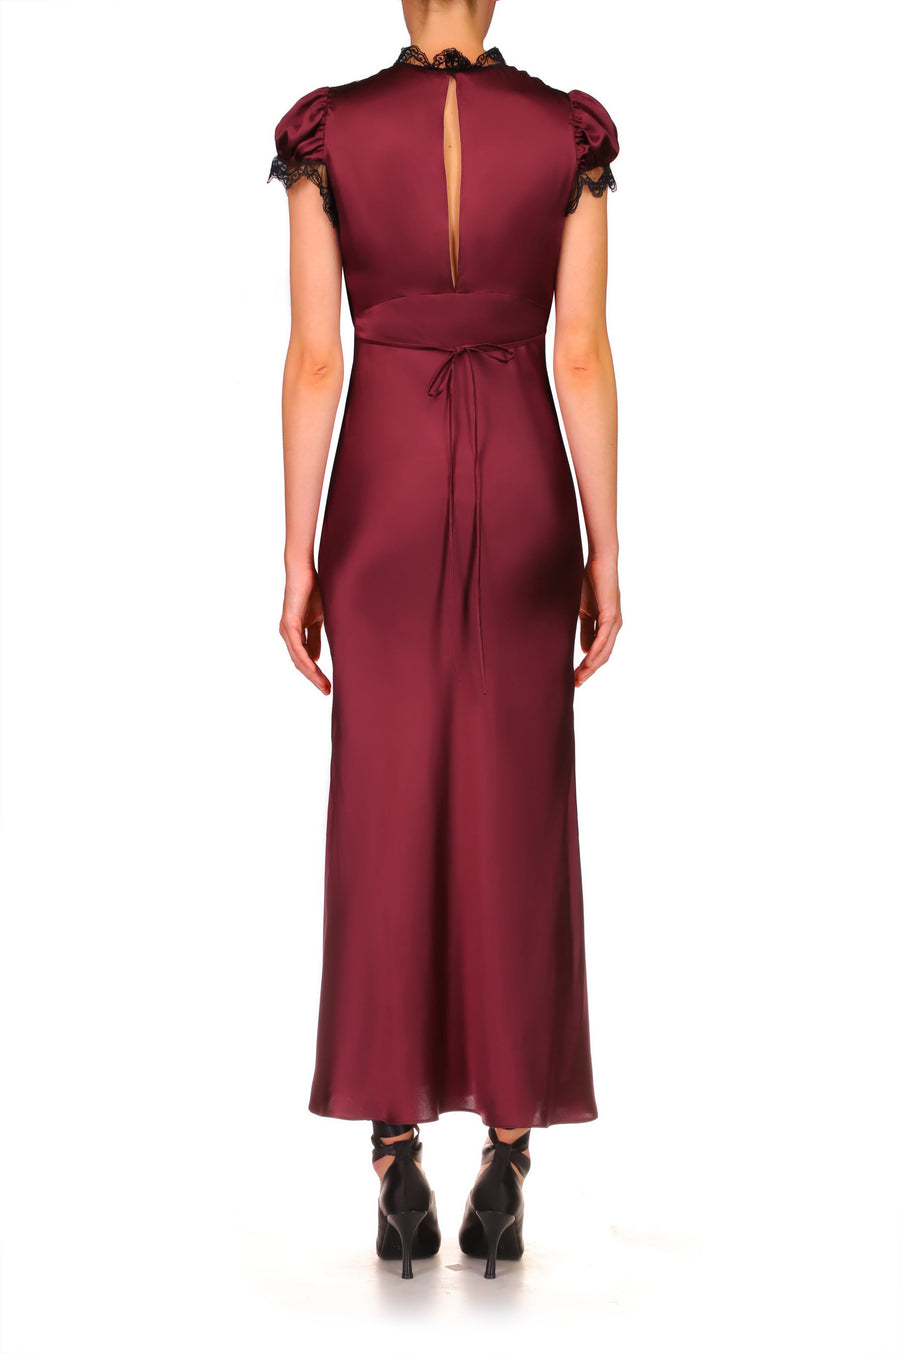 Burgundy Silk Satin Bias Dress With Lace And Ruffle Details